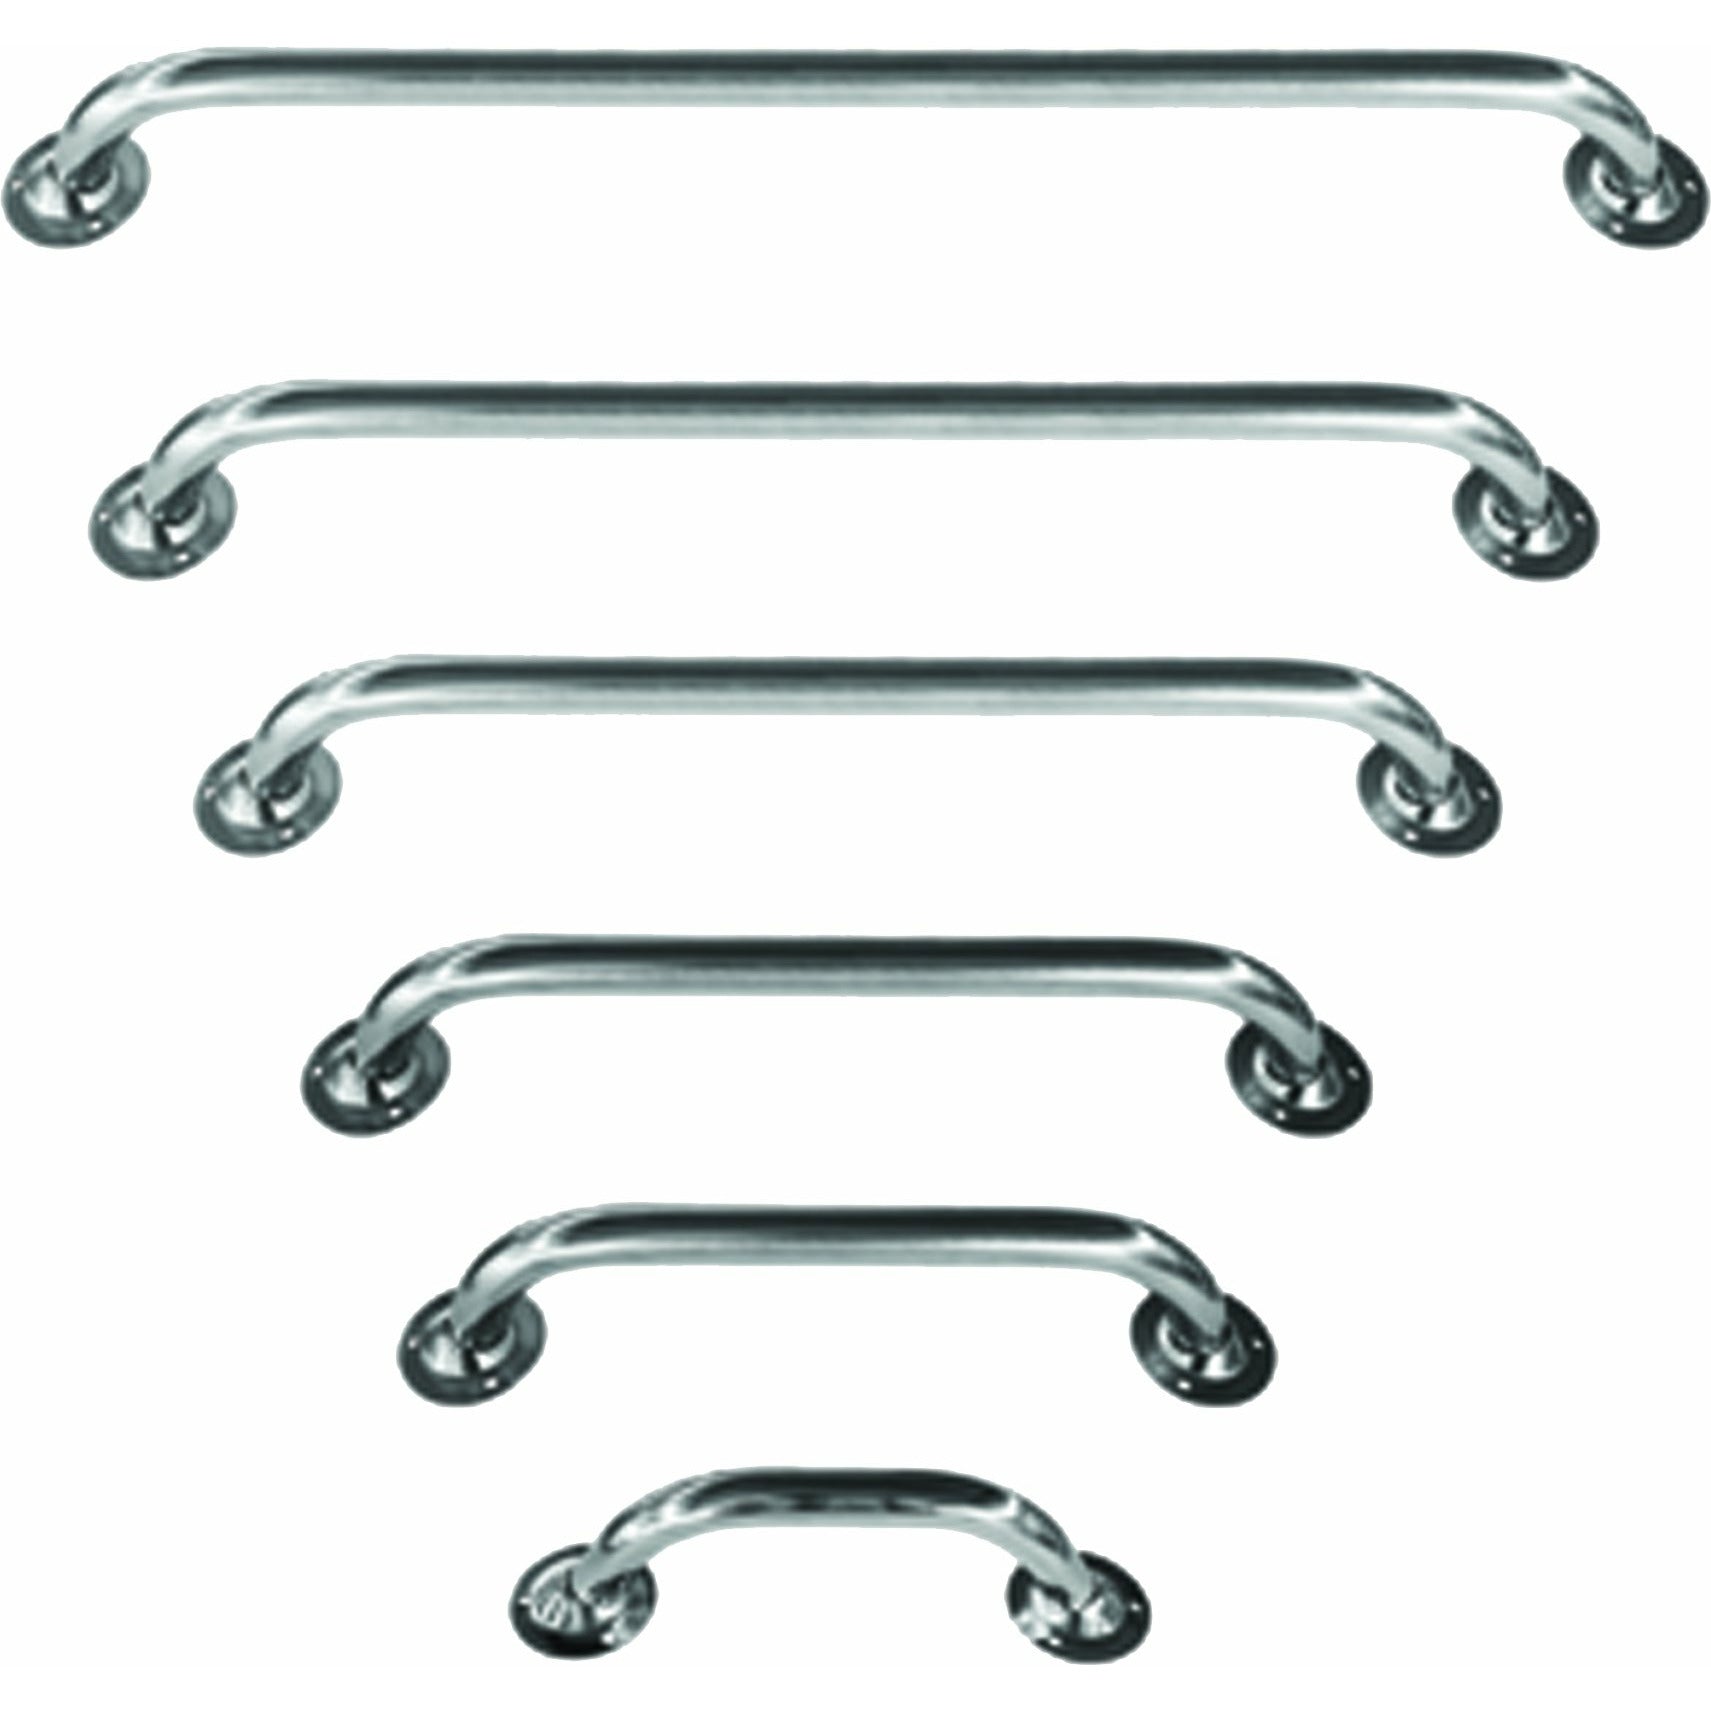 Talamex S.Steel Hand Rails With Bases 22X800 72135280